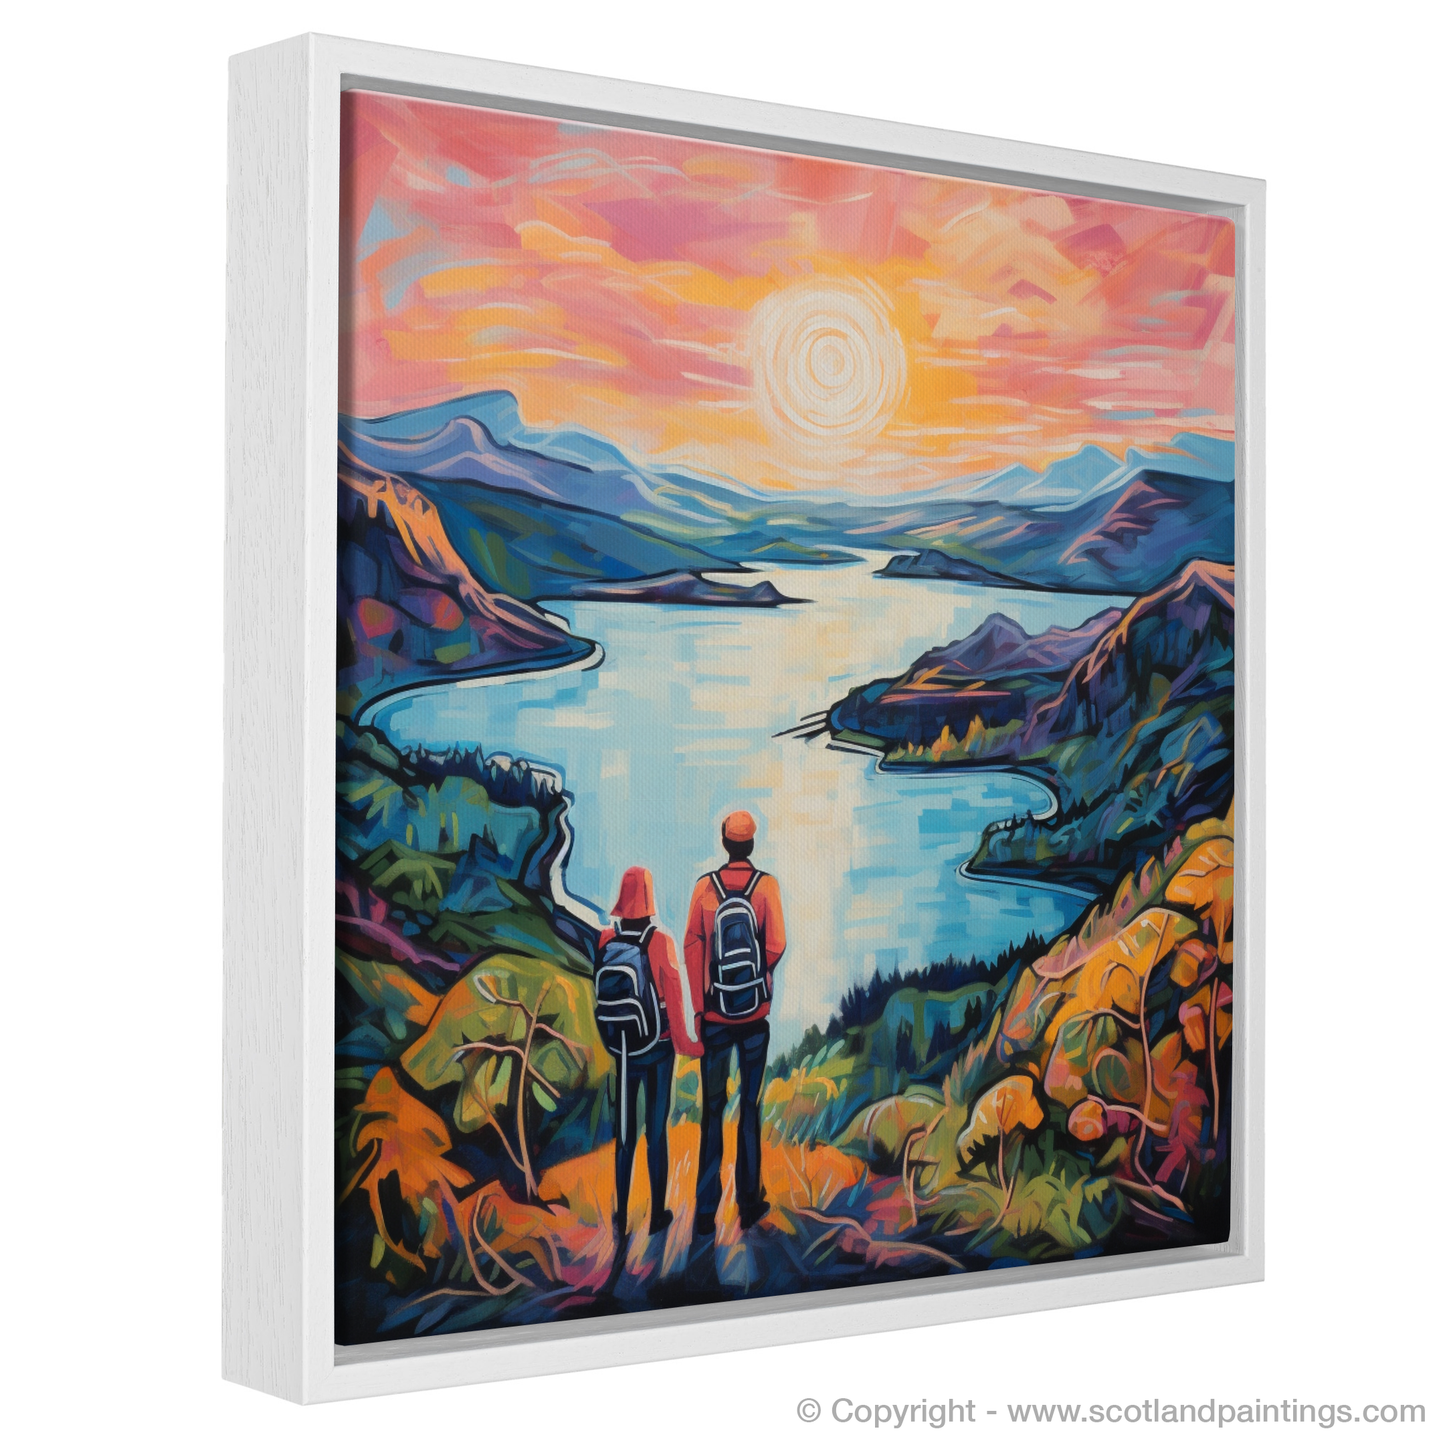 Painting and Art Print of Two hikers looking out on Loch Lomond entitled "Adventurers at the Edge of Wonder: A Fauvist Tribute to Loch Lomond".